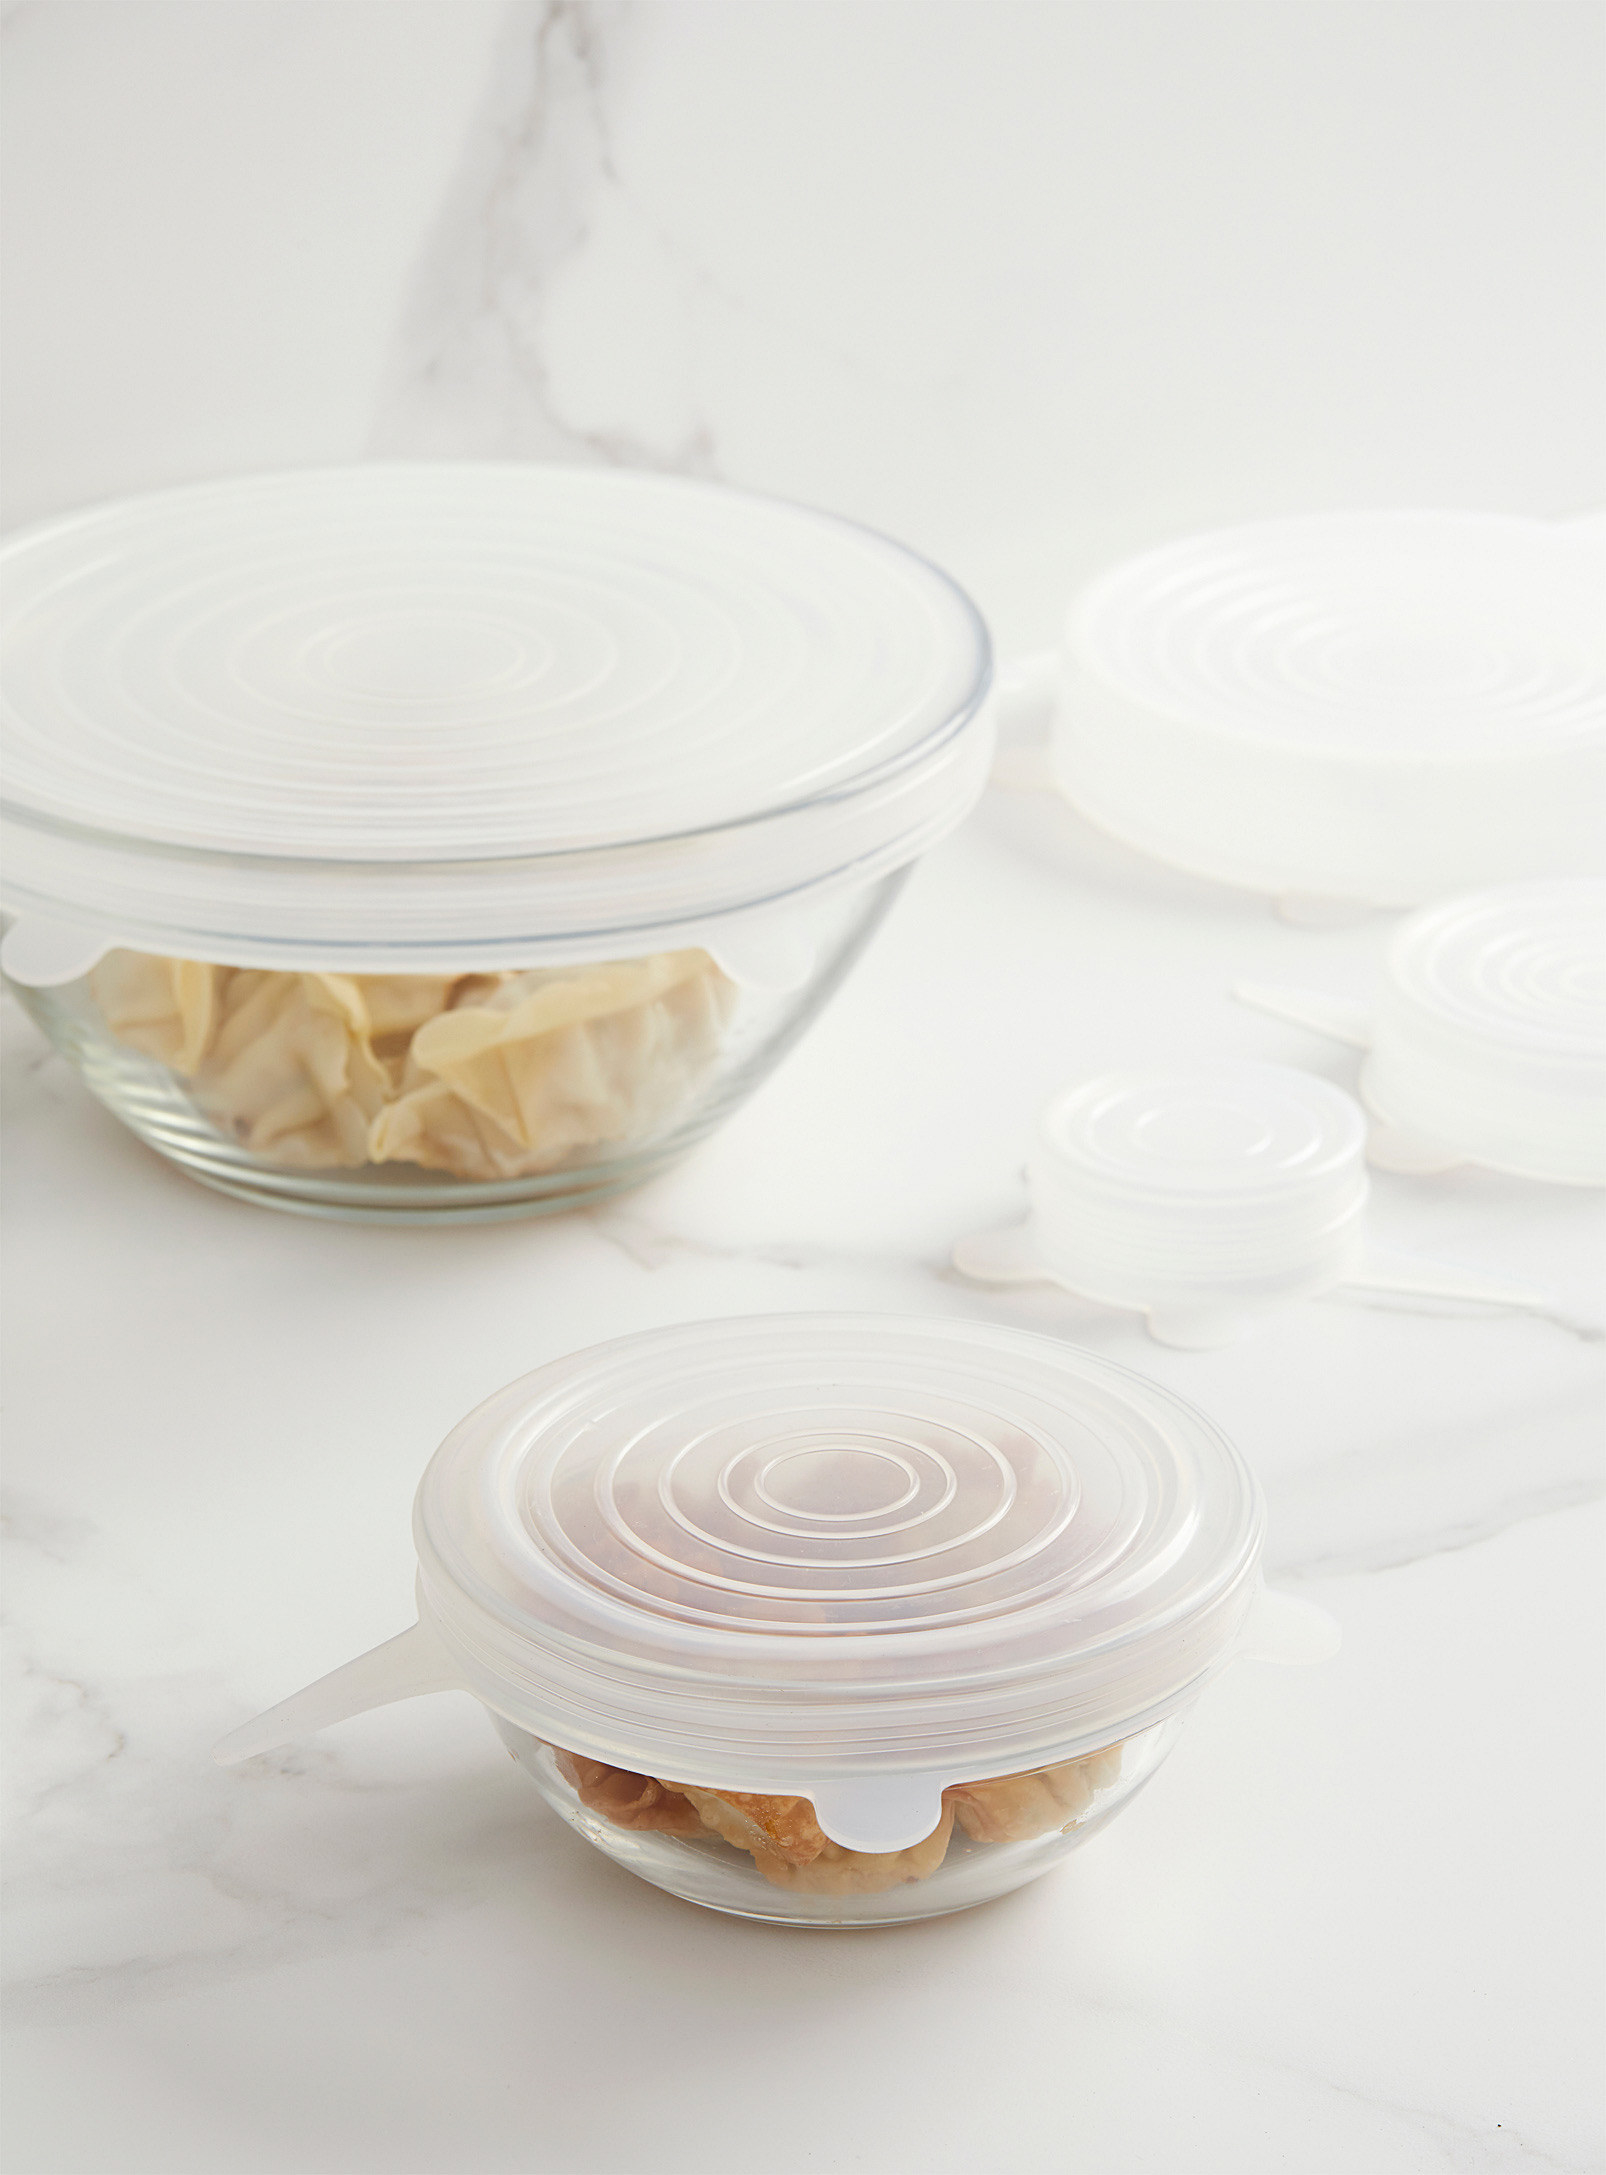 Two glass bowls of different sizes with silicone covers on them